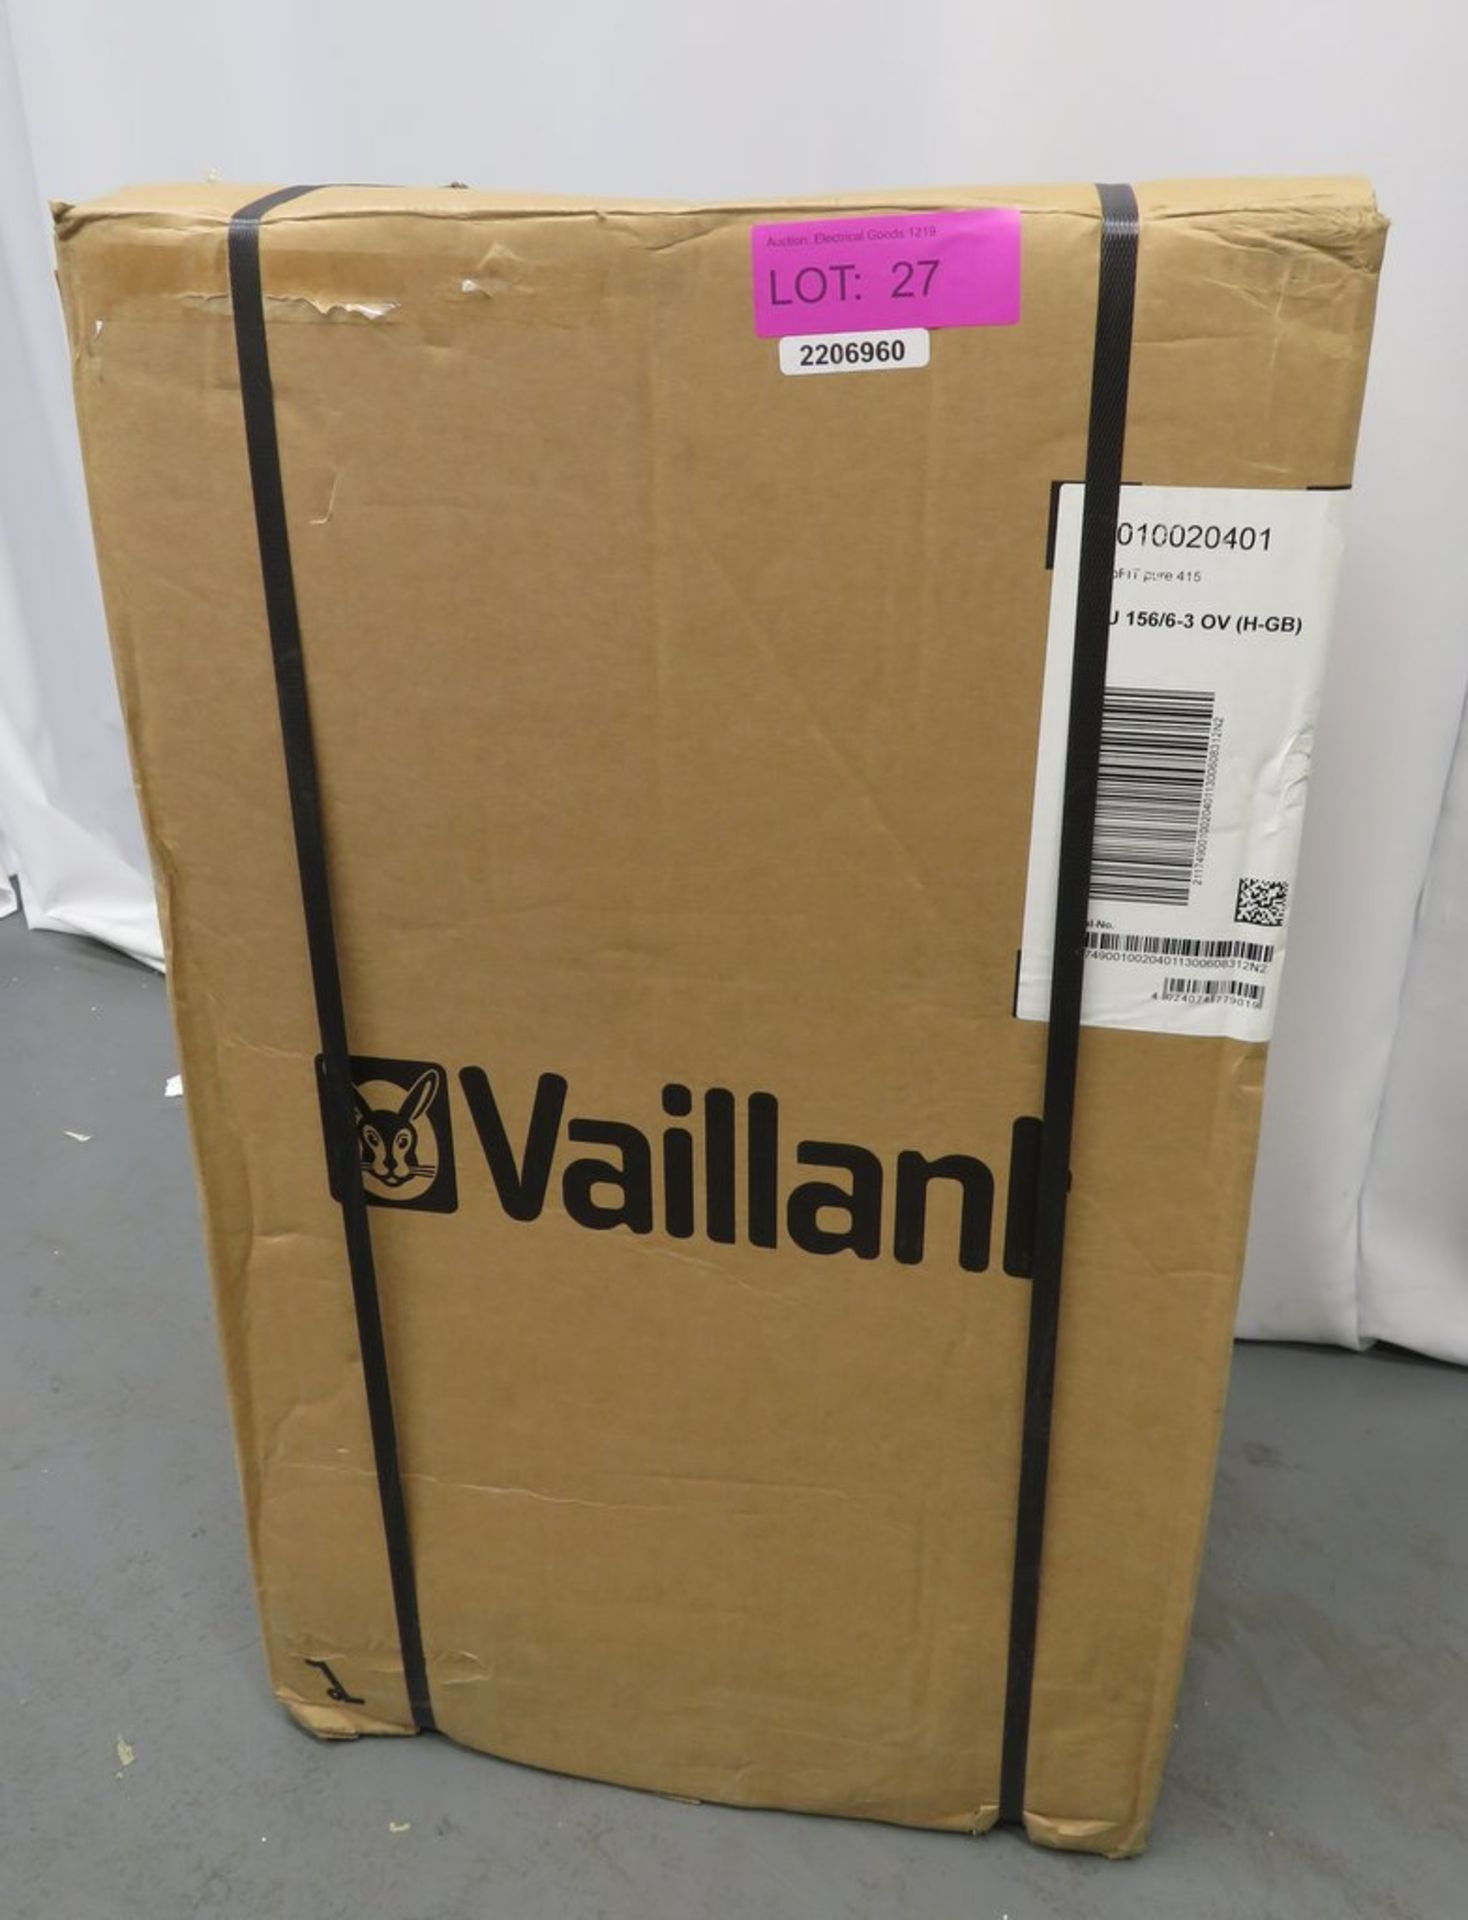 Vaillant 15kw Gas Fired High Efficiency Condensing Natural Gas Boiler. Model: ecoFIT Pure 415. - Image 11 of 12